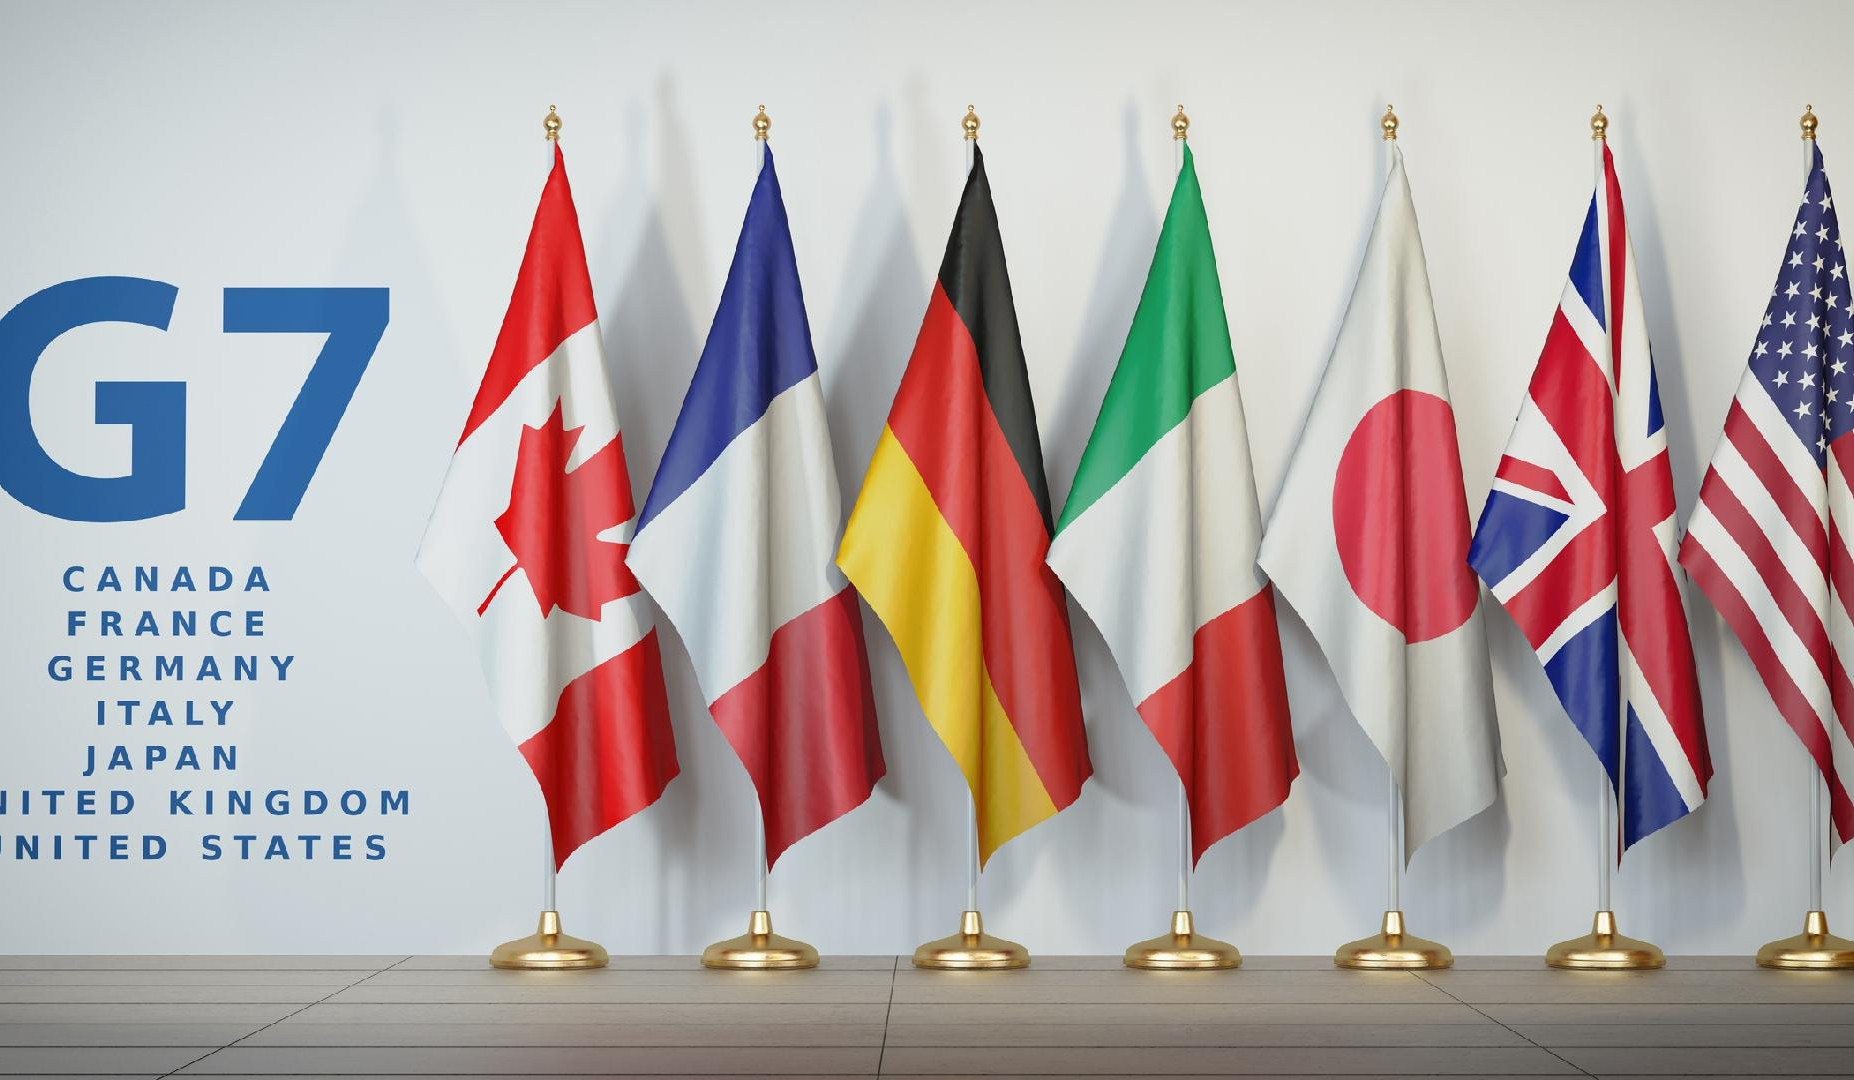 Foreign Ministers of G7 countries plan to discuss Ukraine in Germany